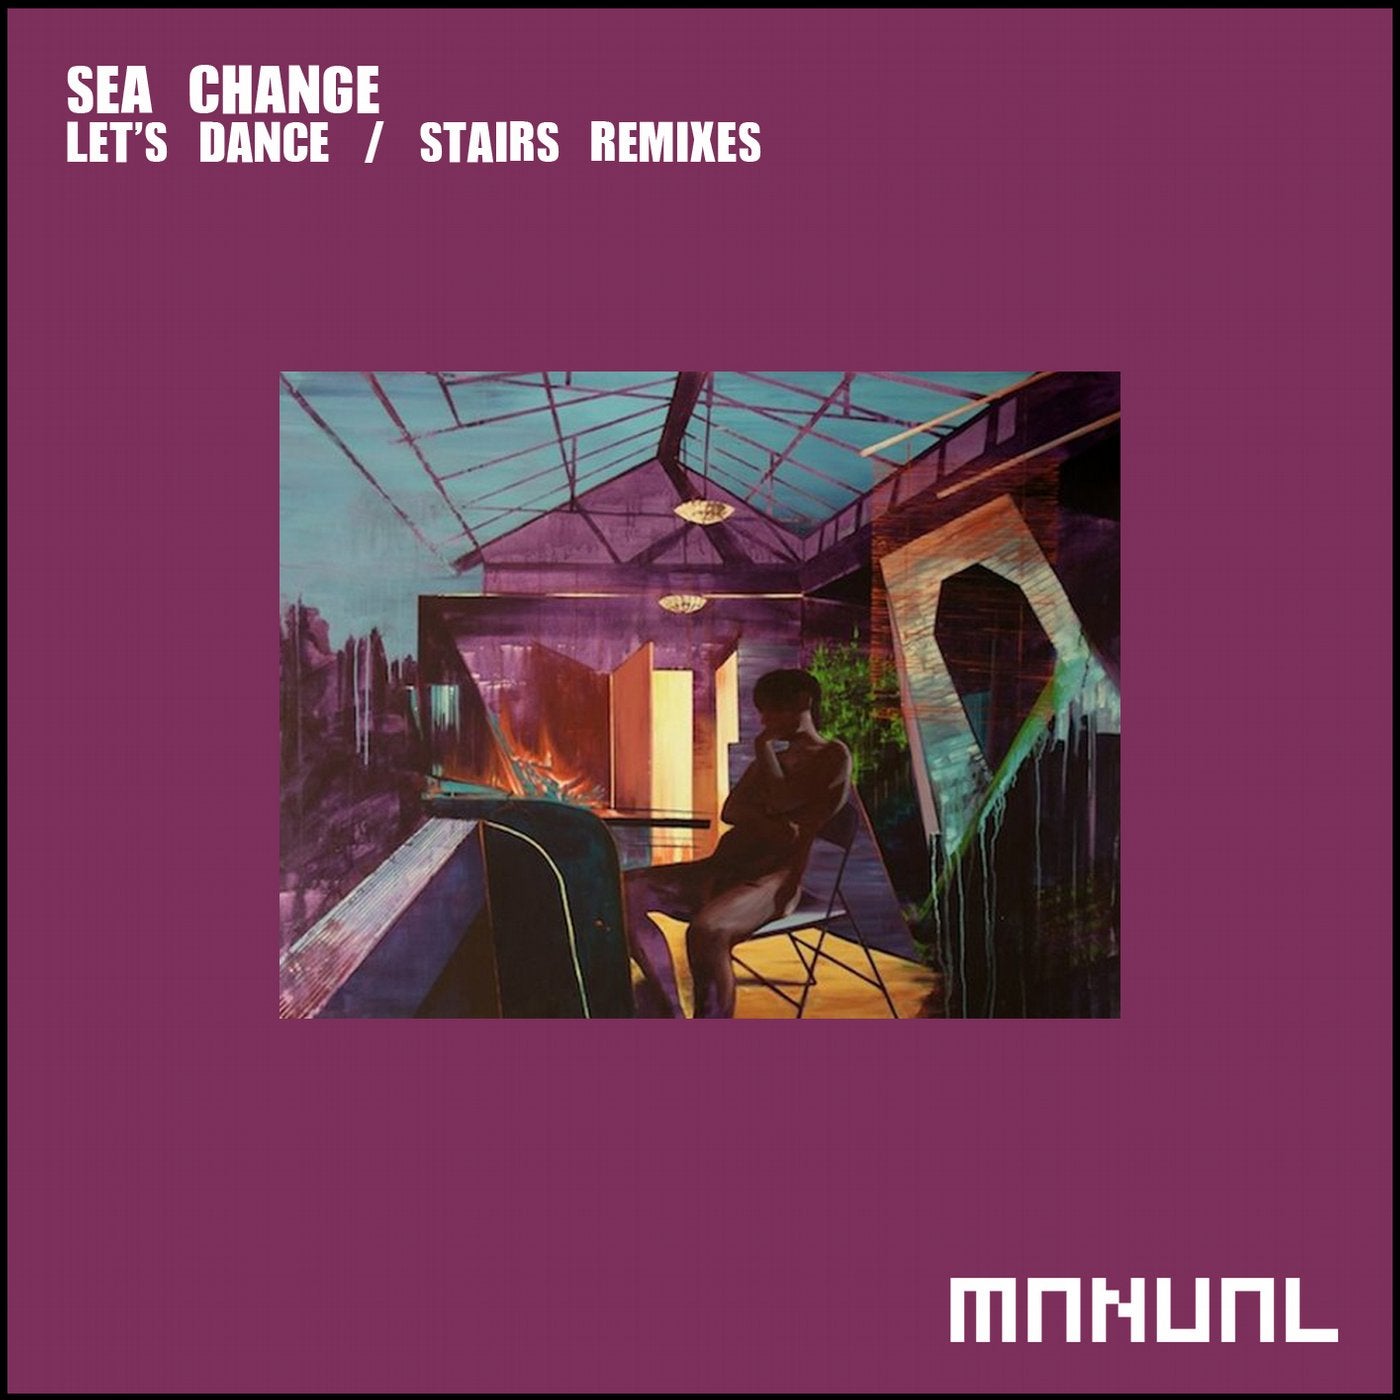 Let's Dance / Stairs Remixes